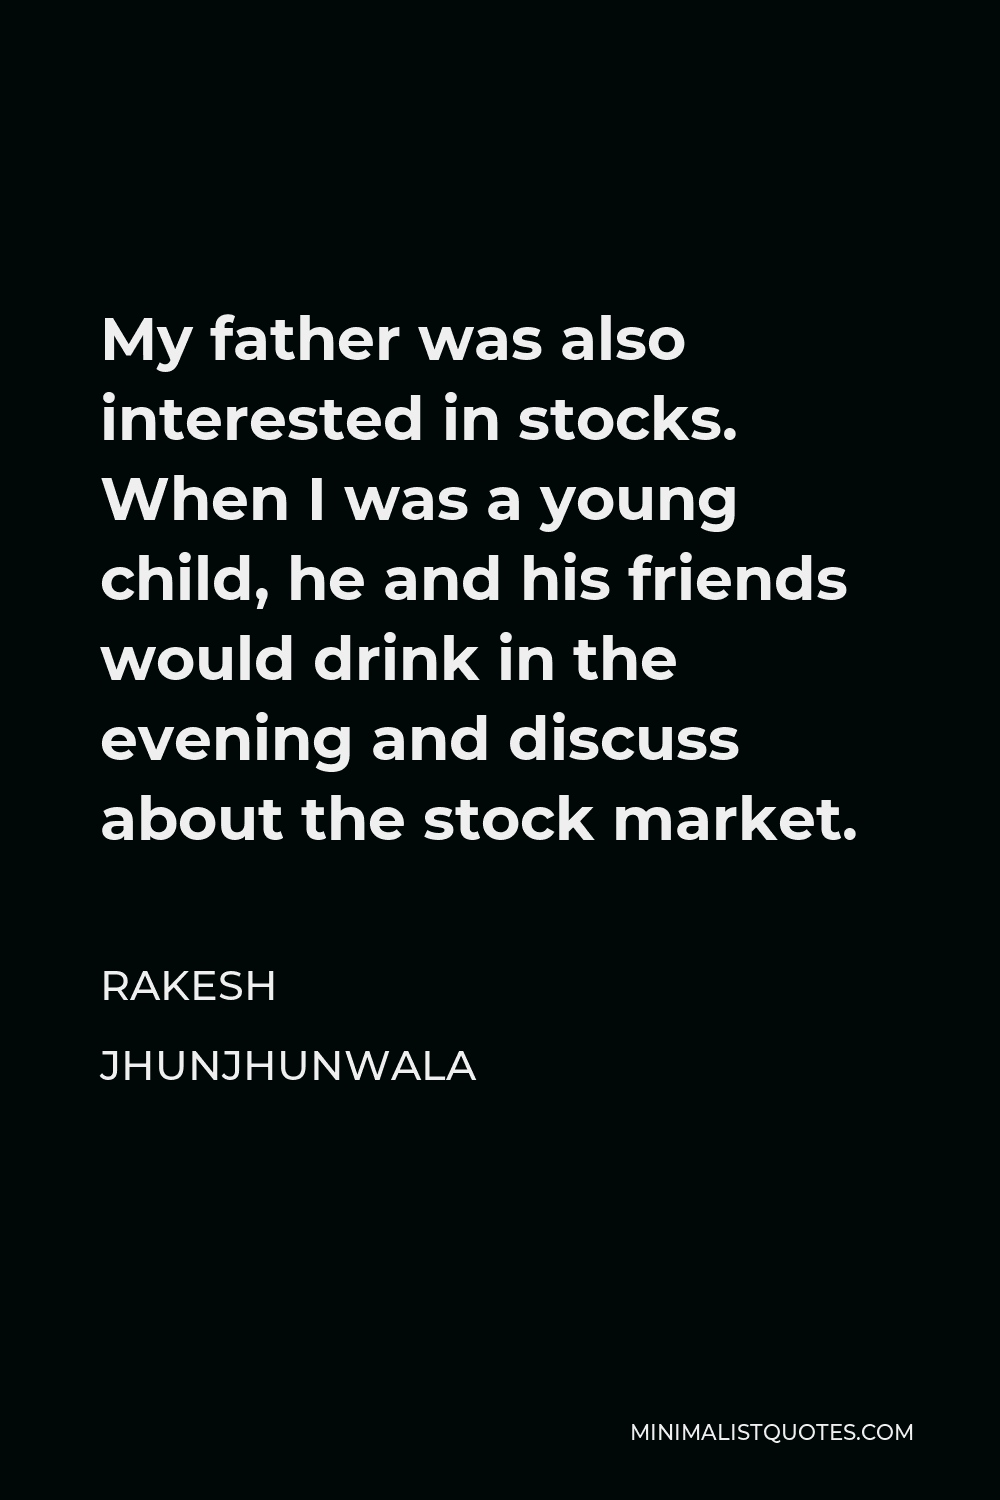 Rakesh Jhunjhunwala Quote - My father was also interested in stocks. When I was a young child, he and his friends would drink in the evening and discuss about the stock market.